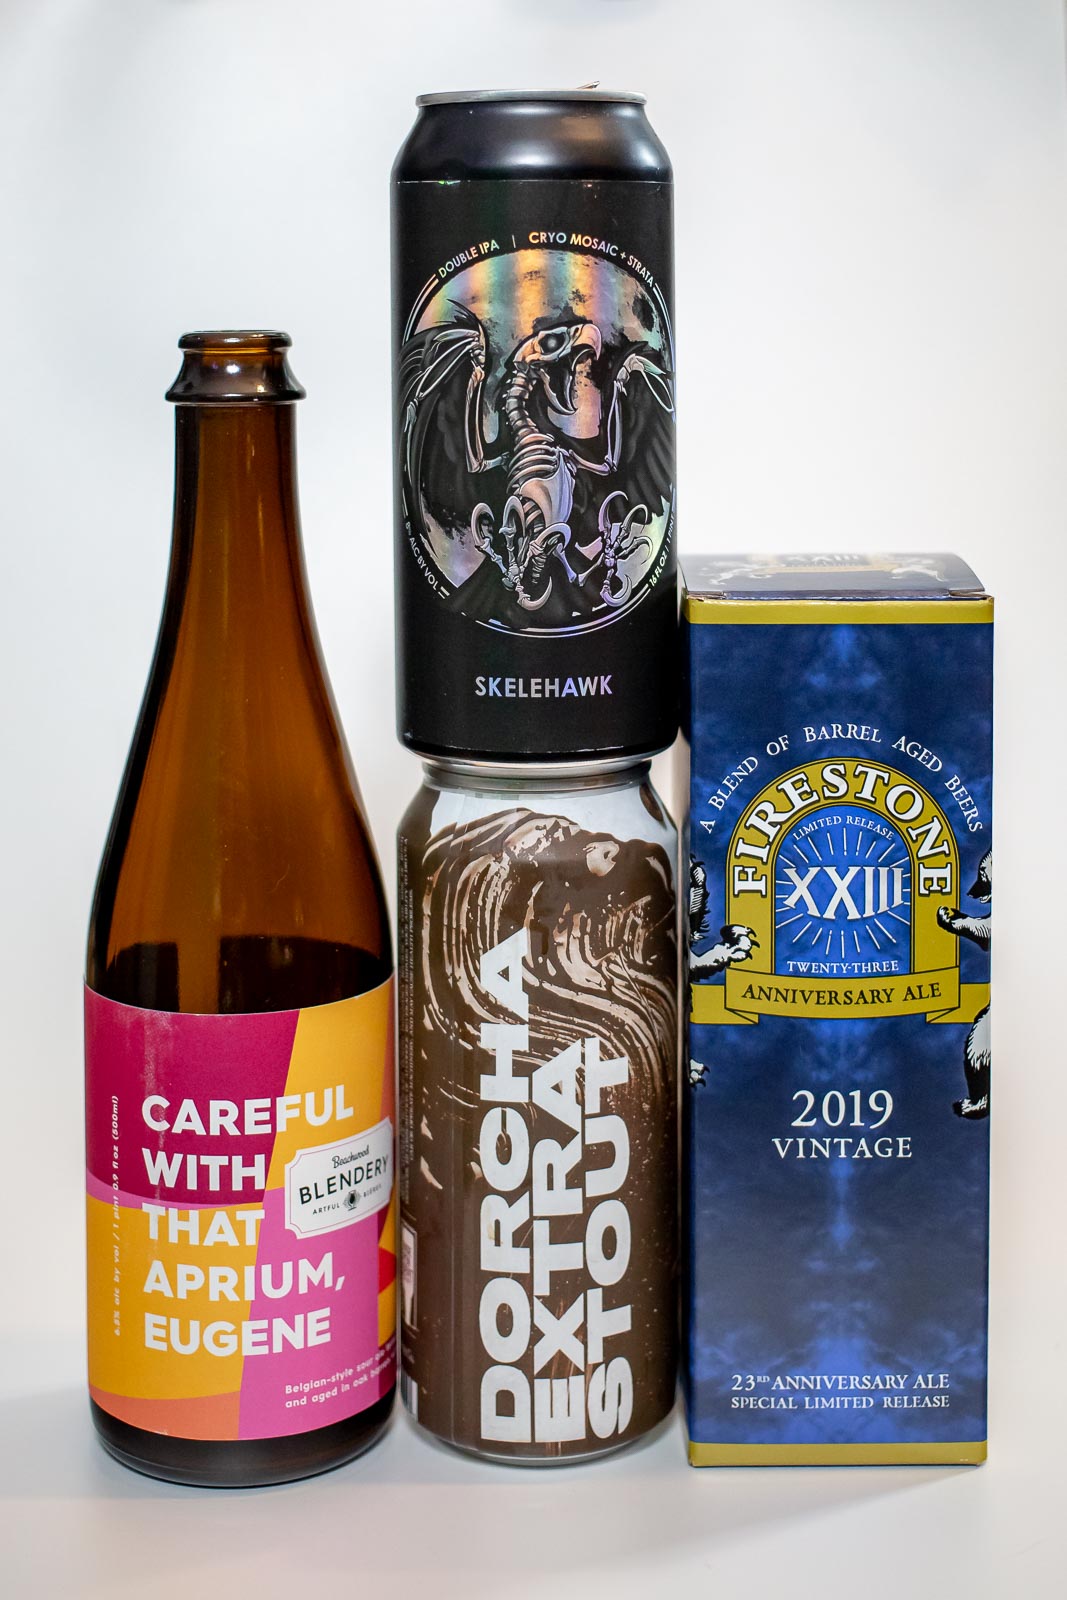 Pictured: Beers from Parish Brewing, Horus Aged Ales, Pariah Brewing, Beachwood Blendery, and Firestone Walker Brewing Company.